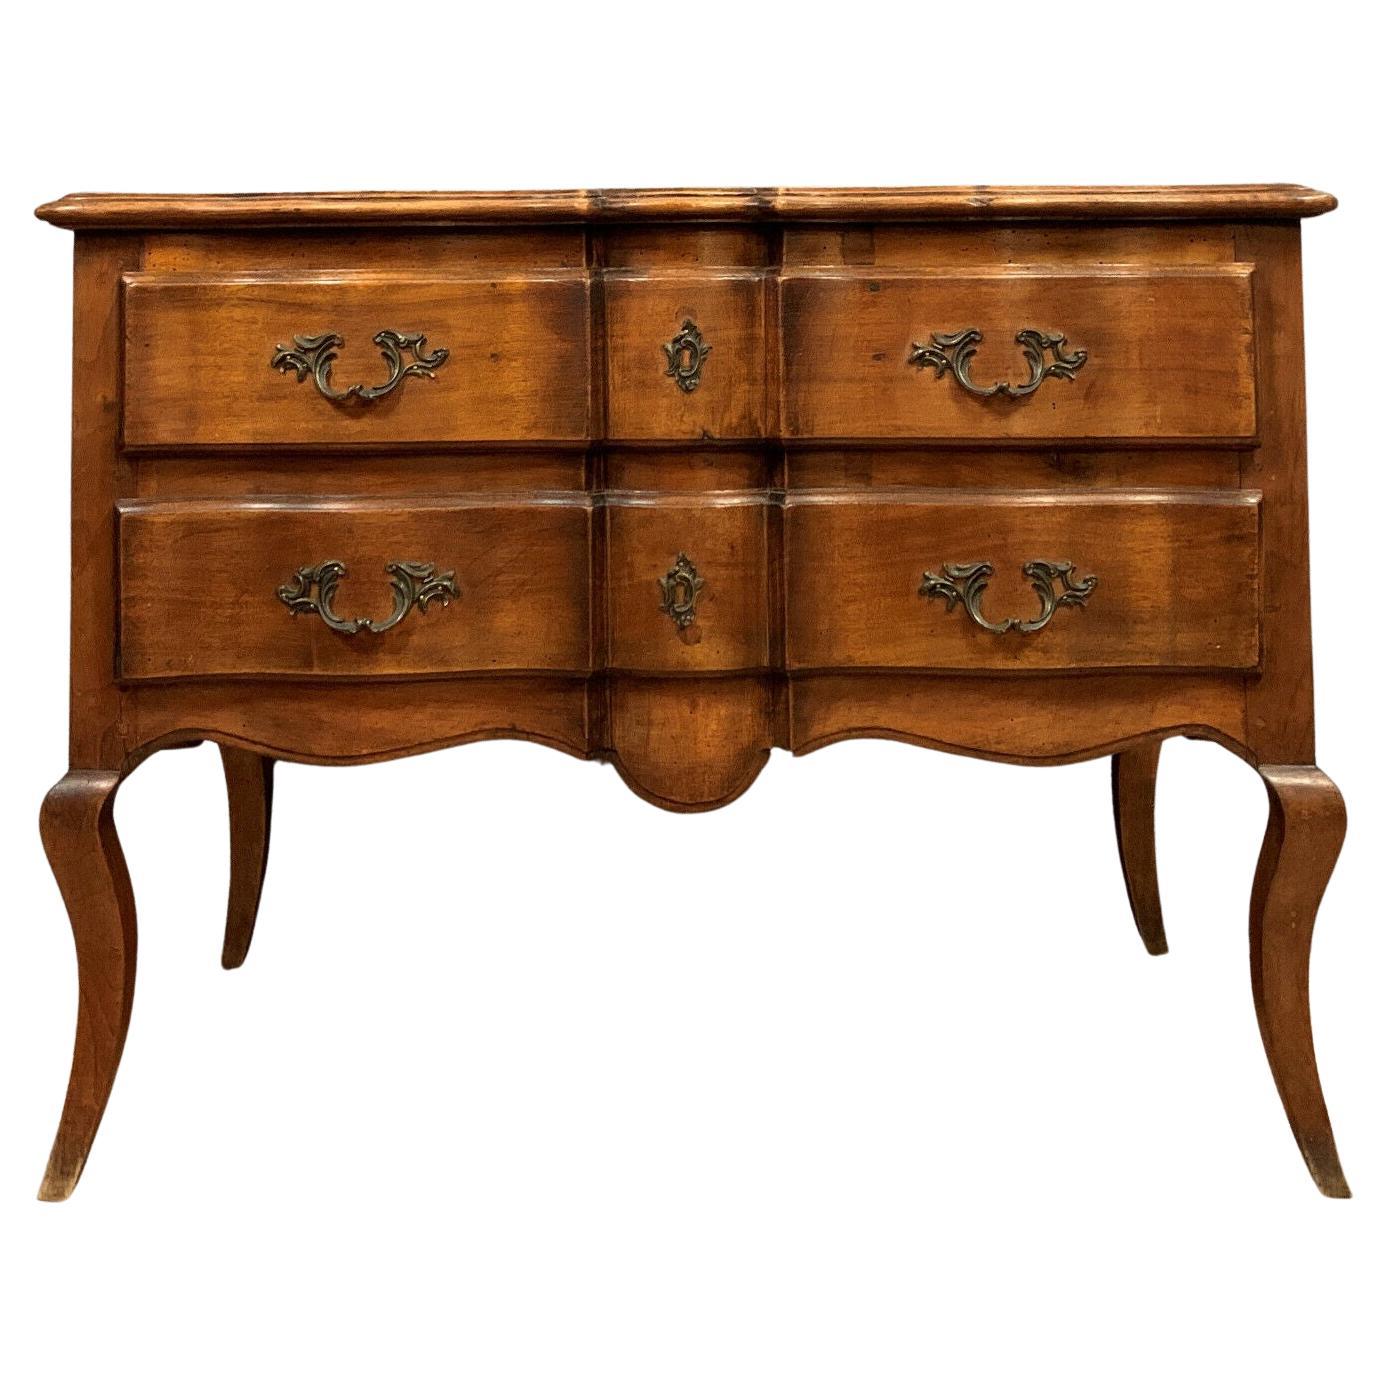 Exquisite Louis XV Style Solid Walnut Bombe Commode circa 1880 -1X14 For Sale